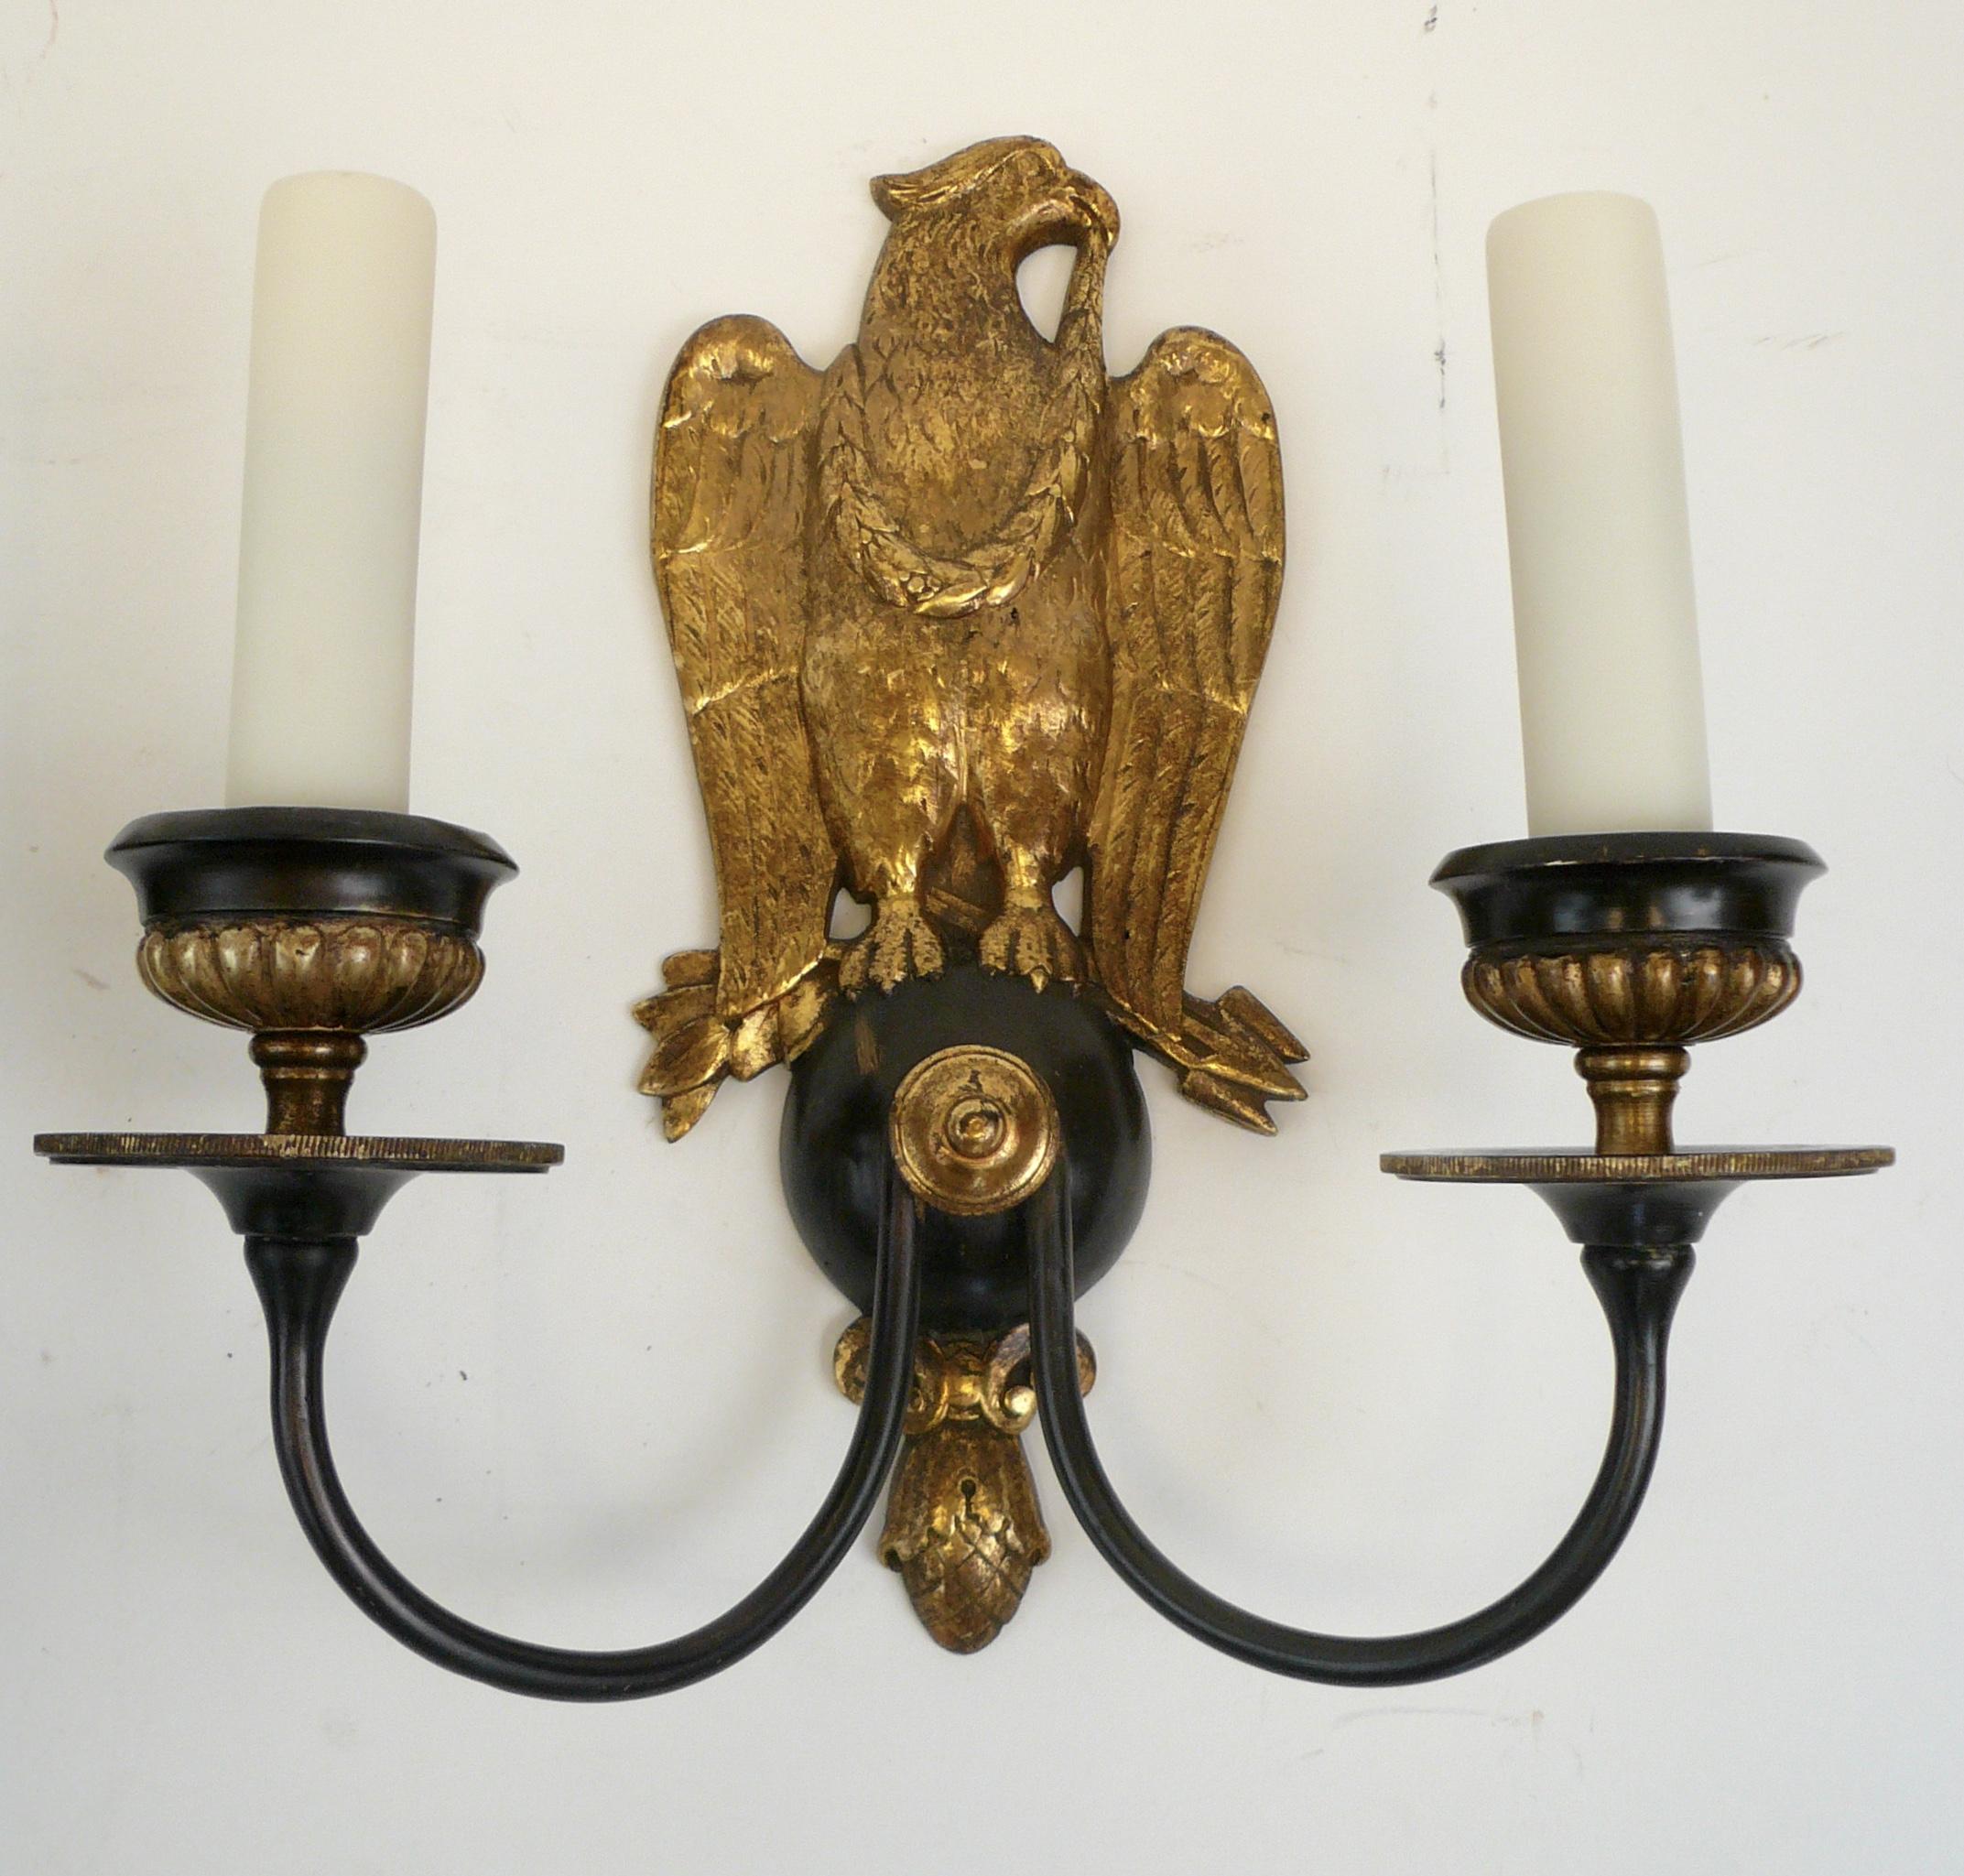 20th Century Pair of Regency Style Bronze Eagle Sconces Attributed to E, F, Caldwell